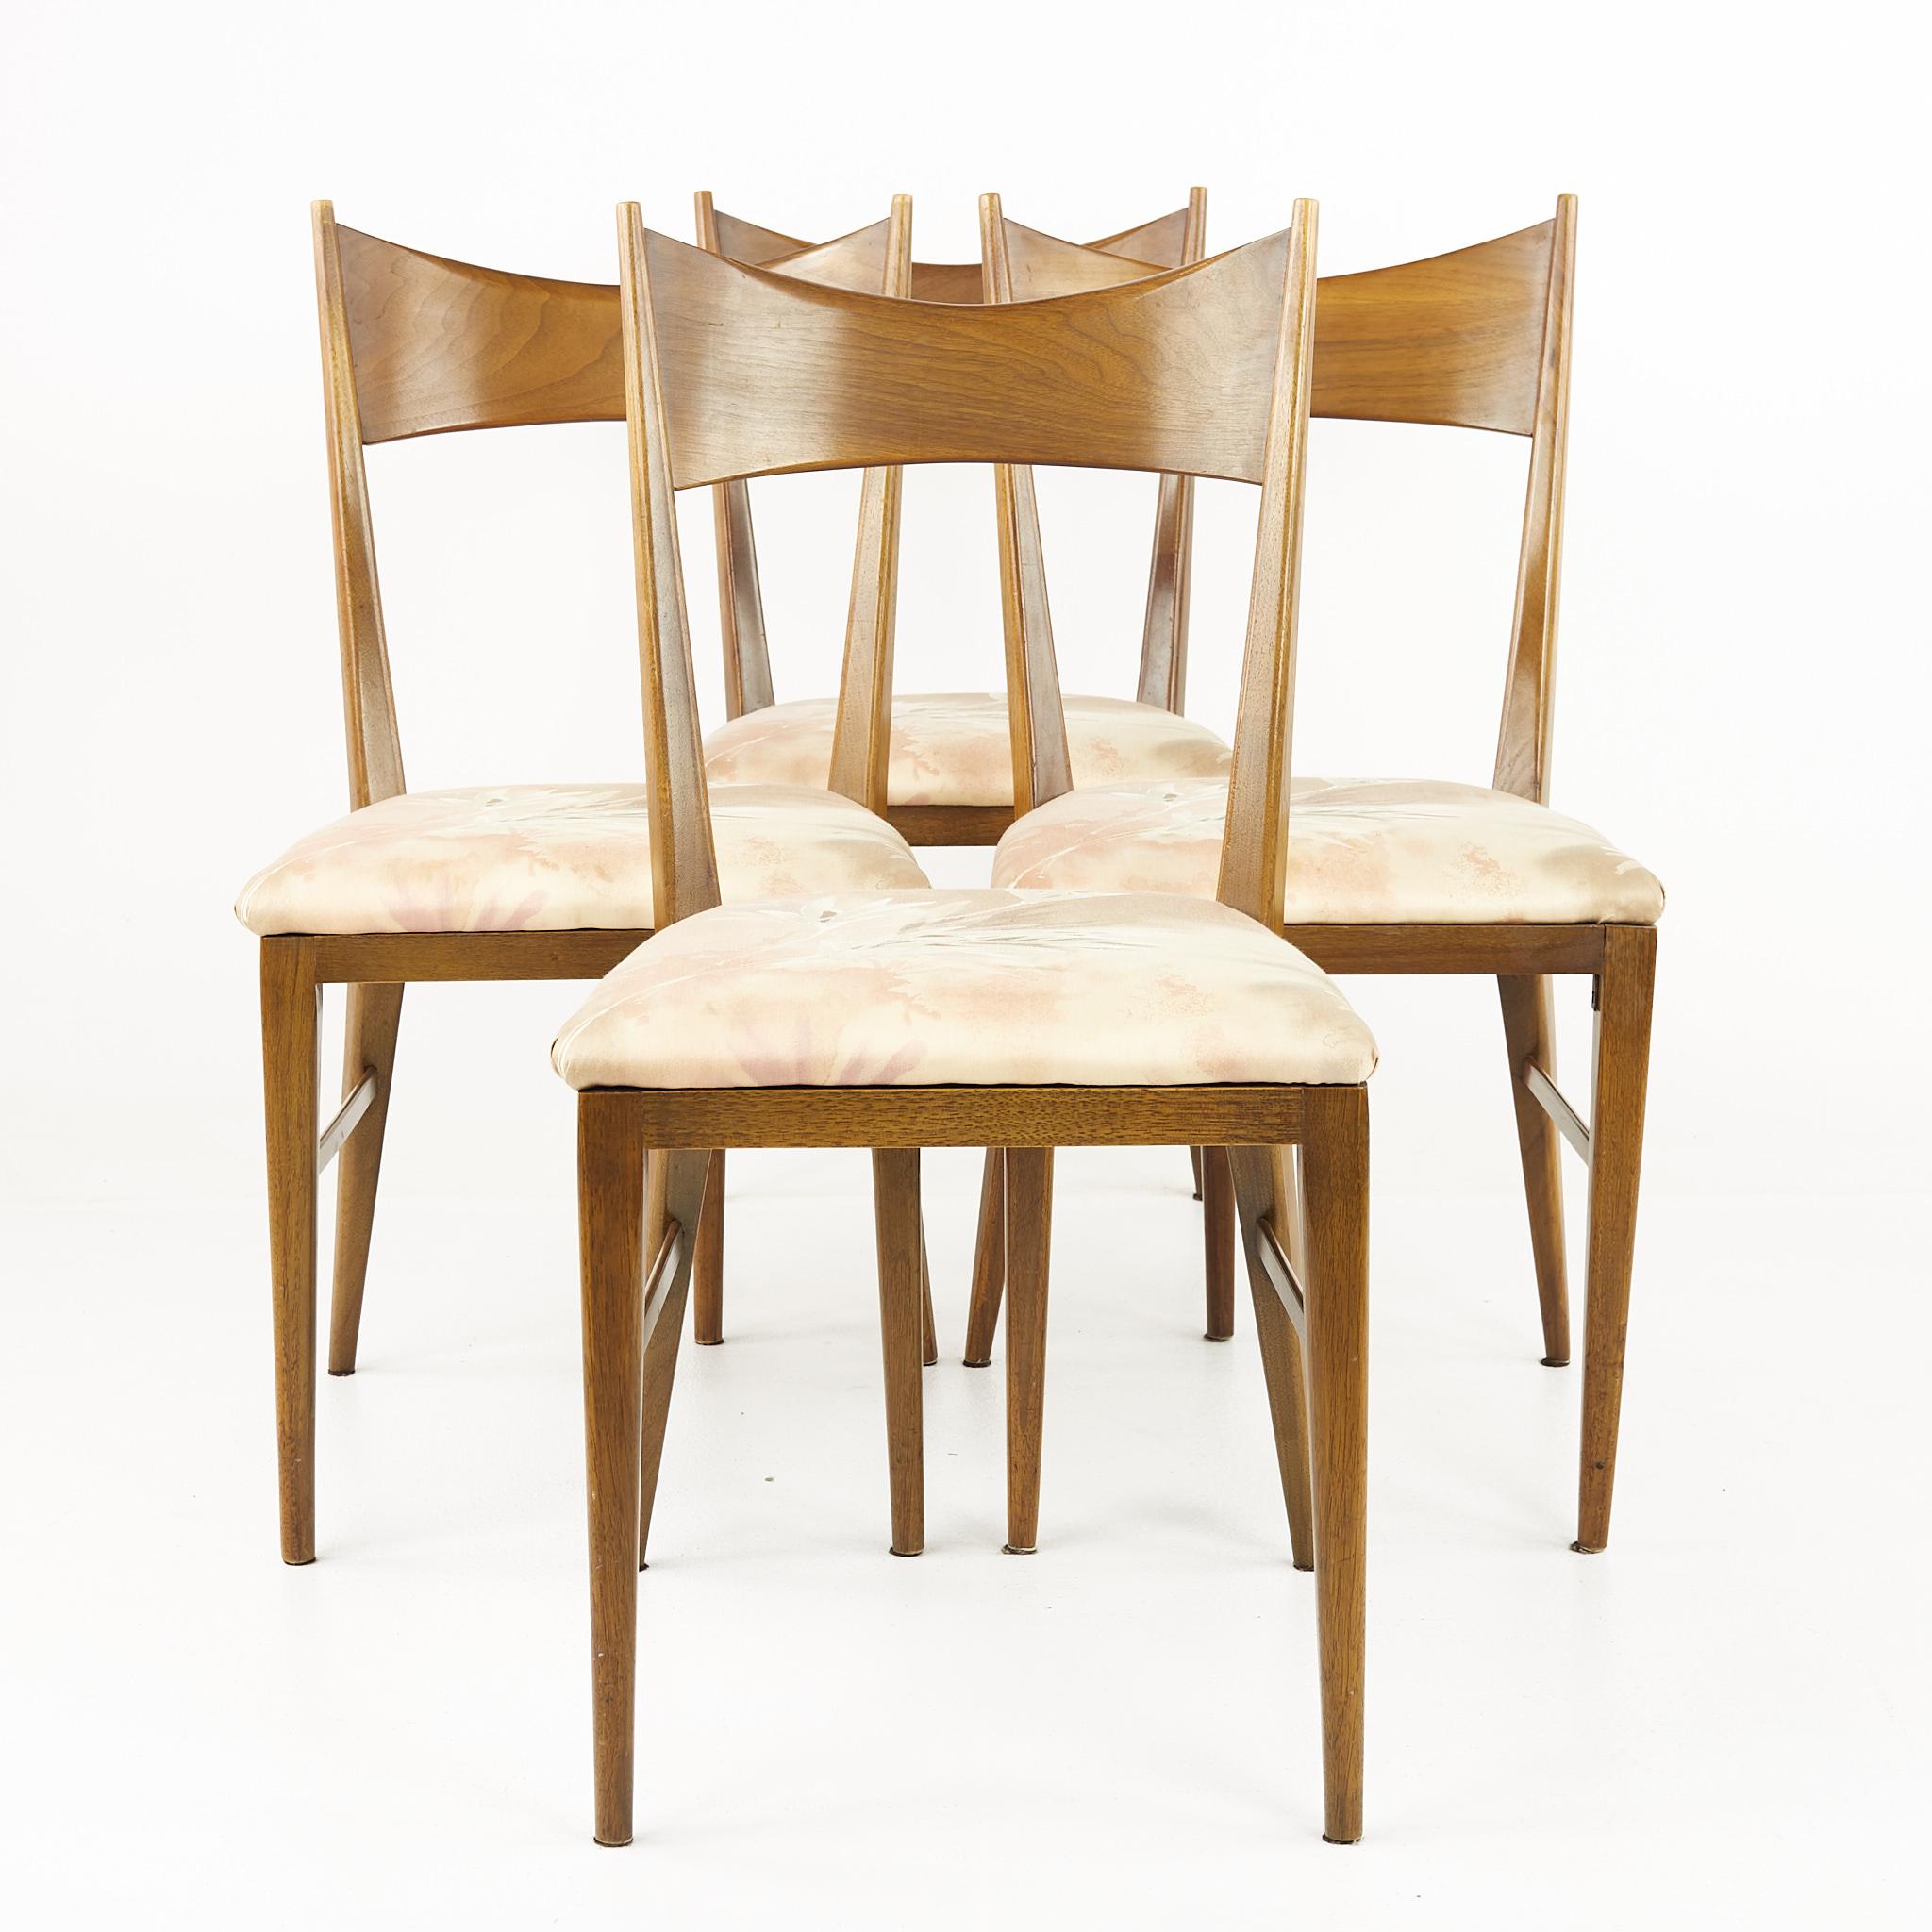 Paul McCobb for Calvin mid century dining chairs - Set of 4

Each chair measures: 17.5 wide x 18 deep x 35 inches high, with a seat height of 18 inches

All pieces of furniture can be had in what we call restored vintage condition. That means